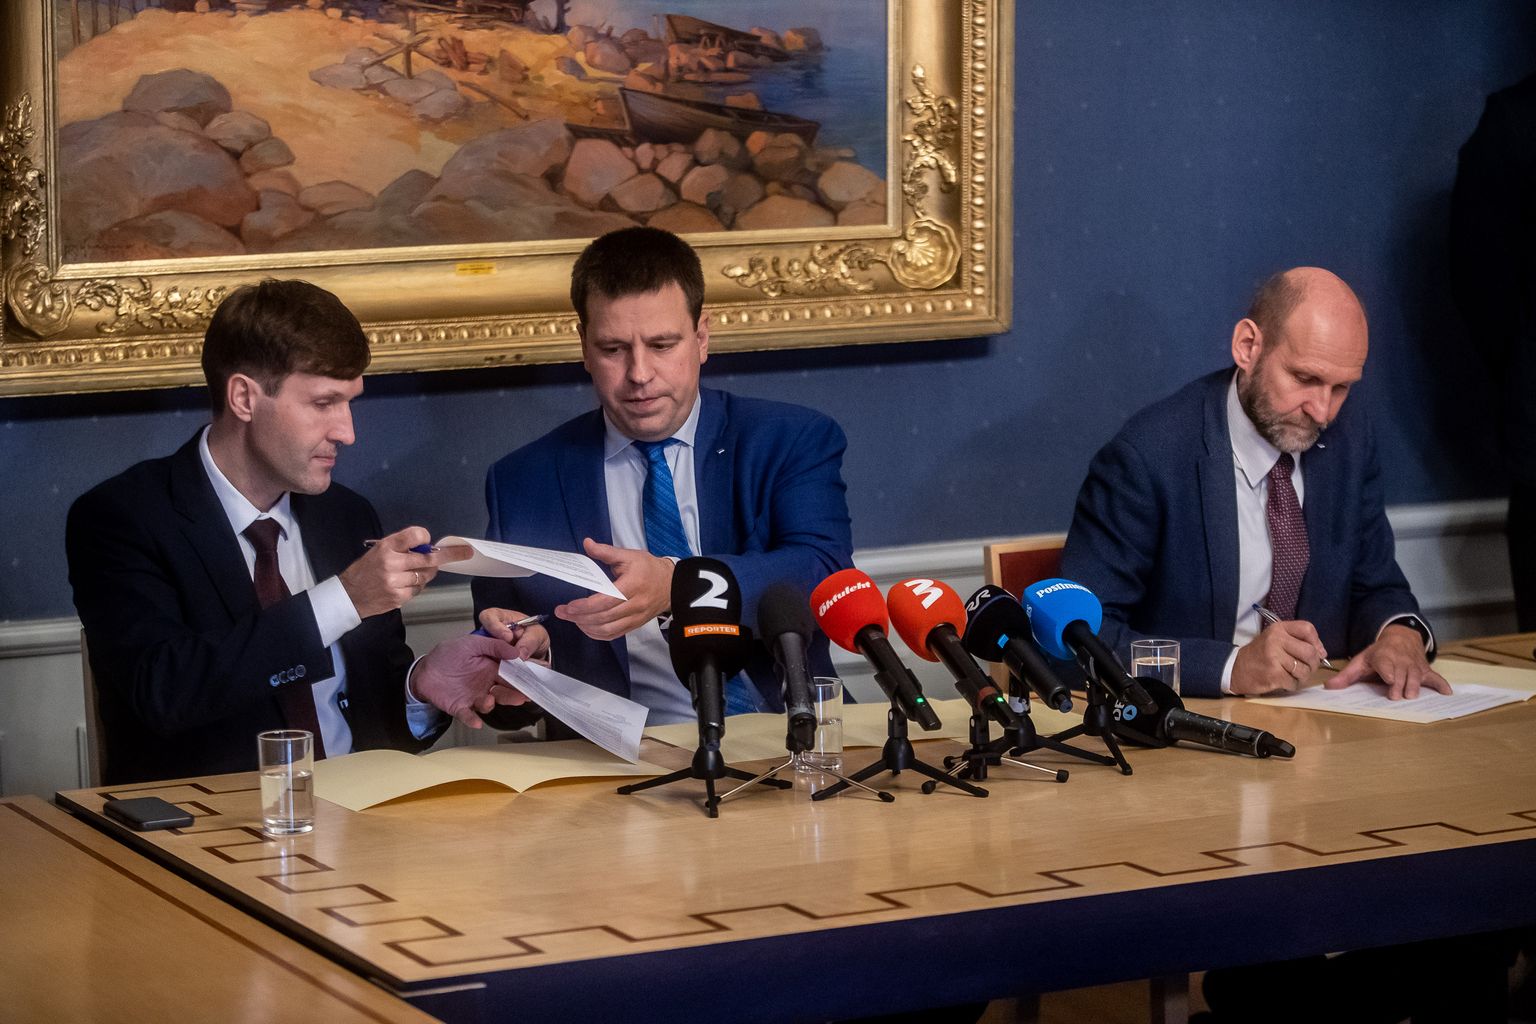 Chairmen of the three partners in Estonia’s ruling coalition signed a joint statement on Thursday to end a government crisis that started on Monday. Finance Minister and leader of the Estonian Conservative People\'s Party (EKRE) Martin Helme, Prime Minister and leader of the Center Party Juri Ratas and leader of the Isamaa party Helir-Valdor Seeder.